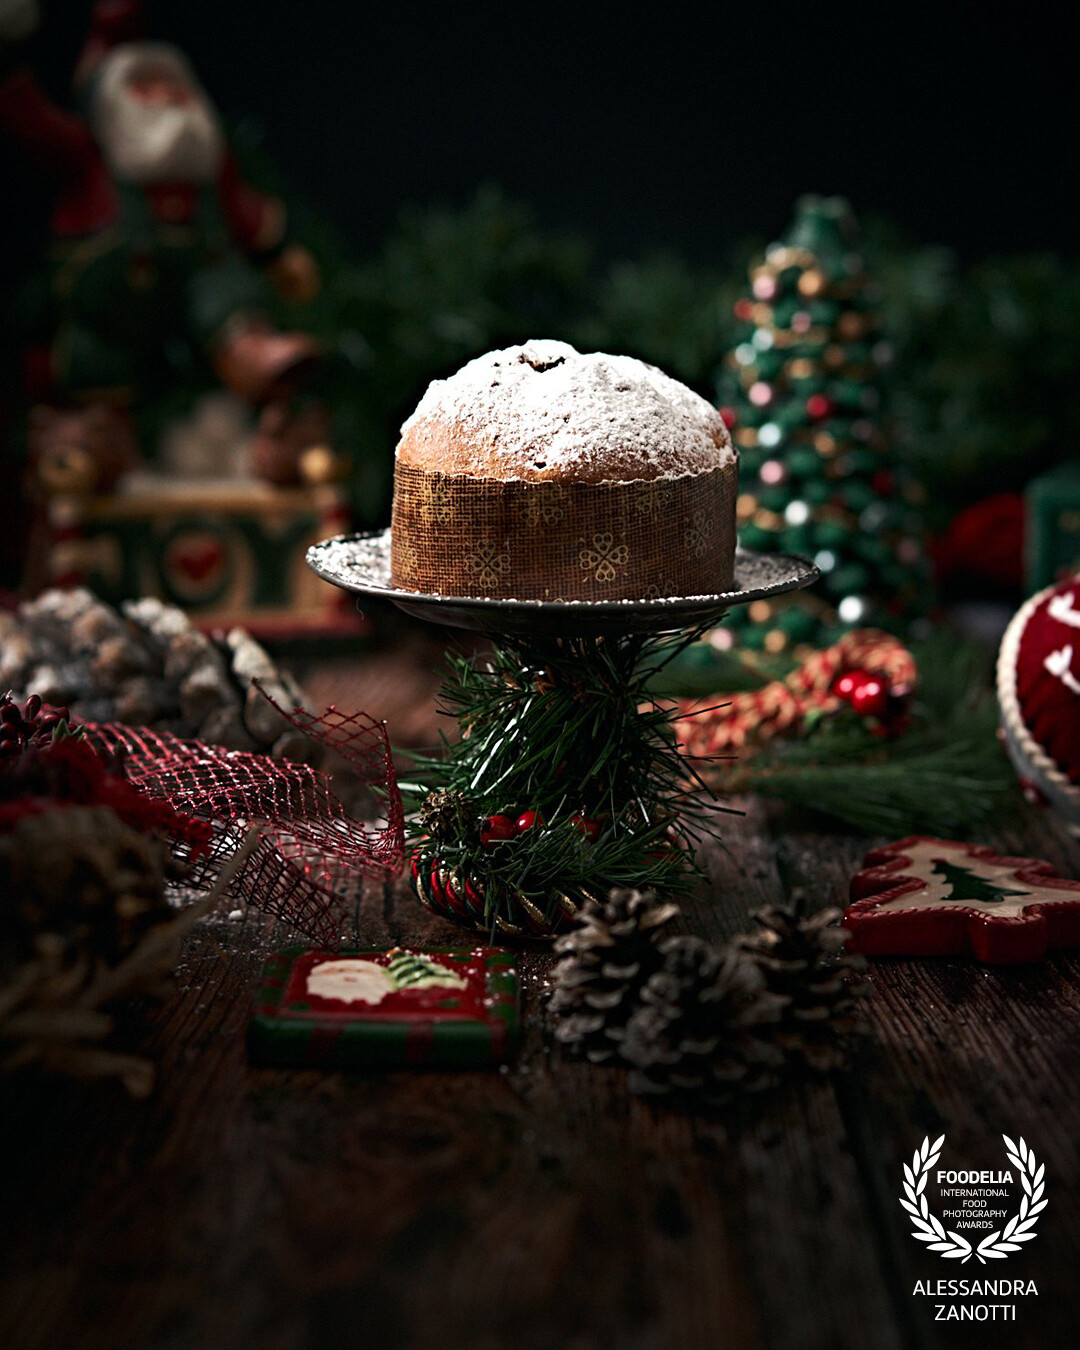 This photograph captures the festive atmosphere of Christmas. The decorations create a warm and welcoming setting, spreading the magic and joy of the holidays. At the center of the scene is a delightful panettone, a symbol of Christmas tradition and sweetness. An image that celebrates the warmth and joy of Christmas, with the panettone embodying the shared pleasure during this special season.